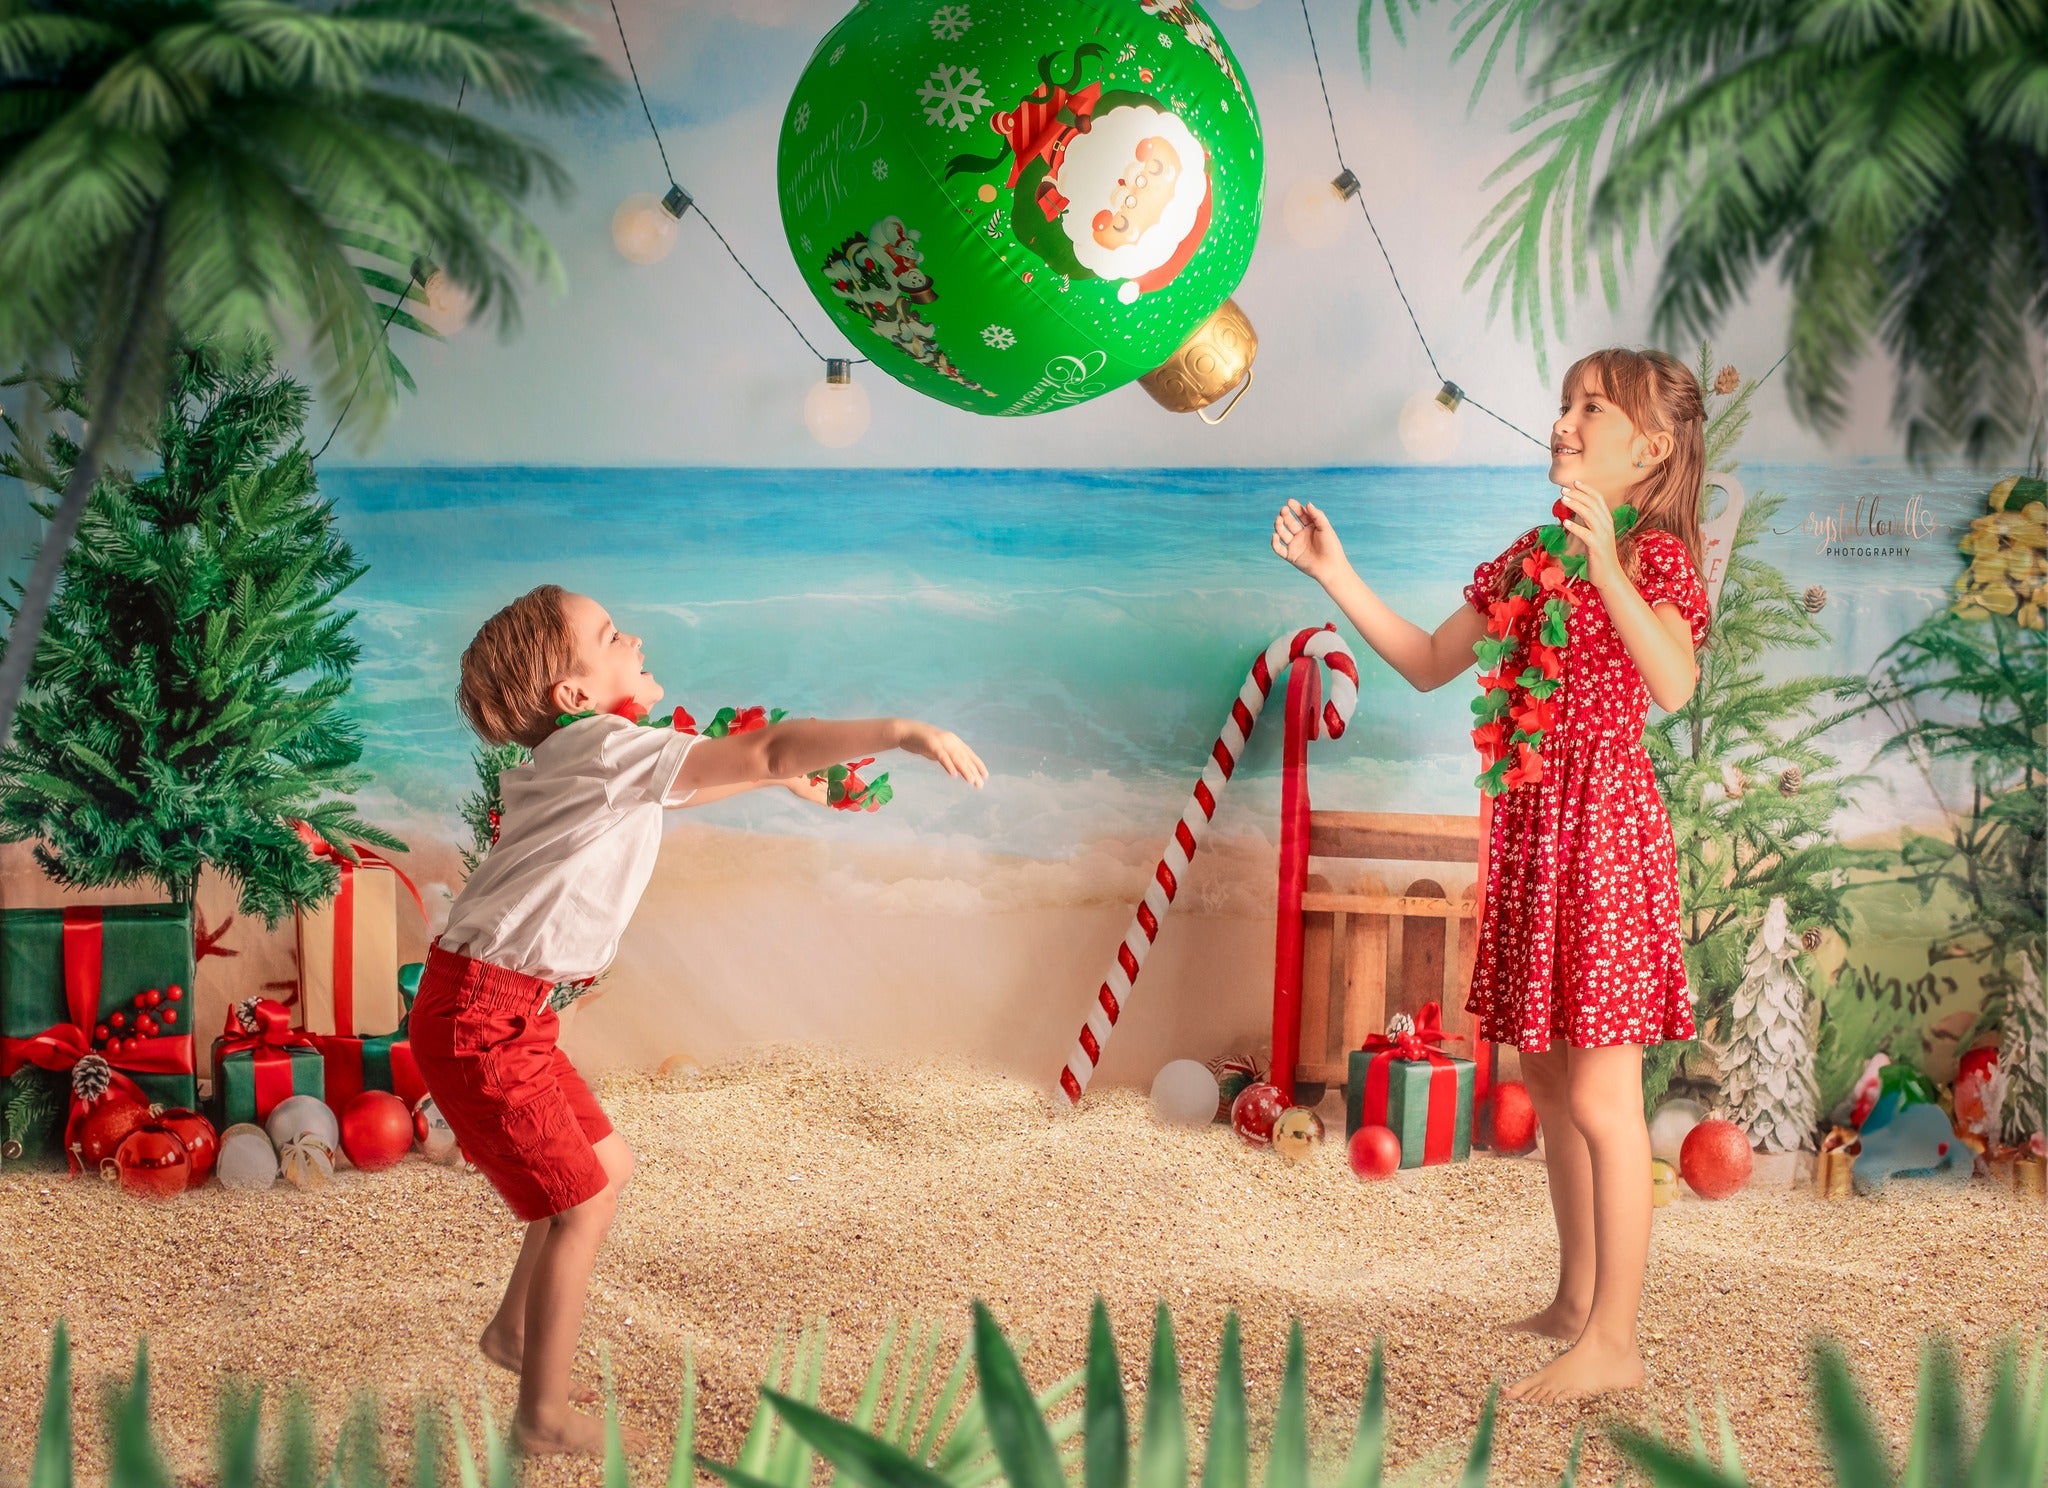 Kate Christmas In Summer Beach Gifts Backdrop Designed by Emetselch